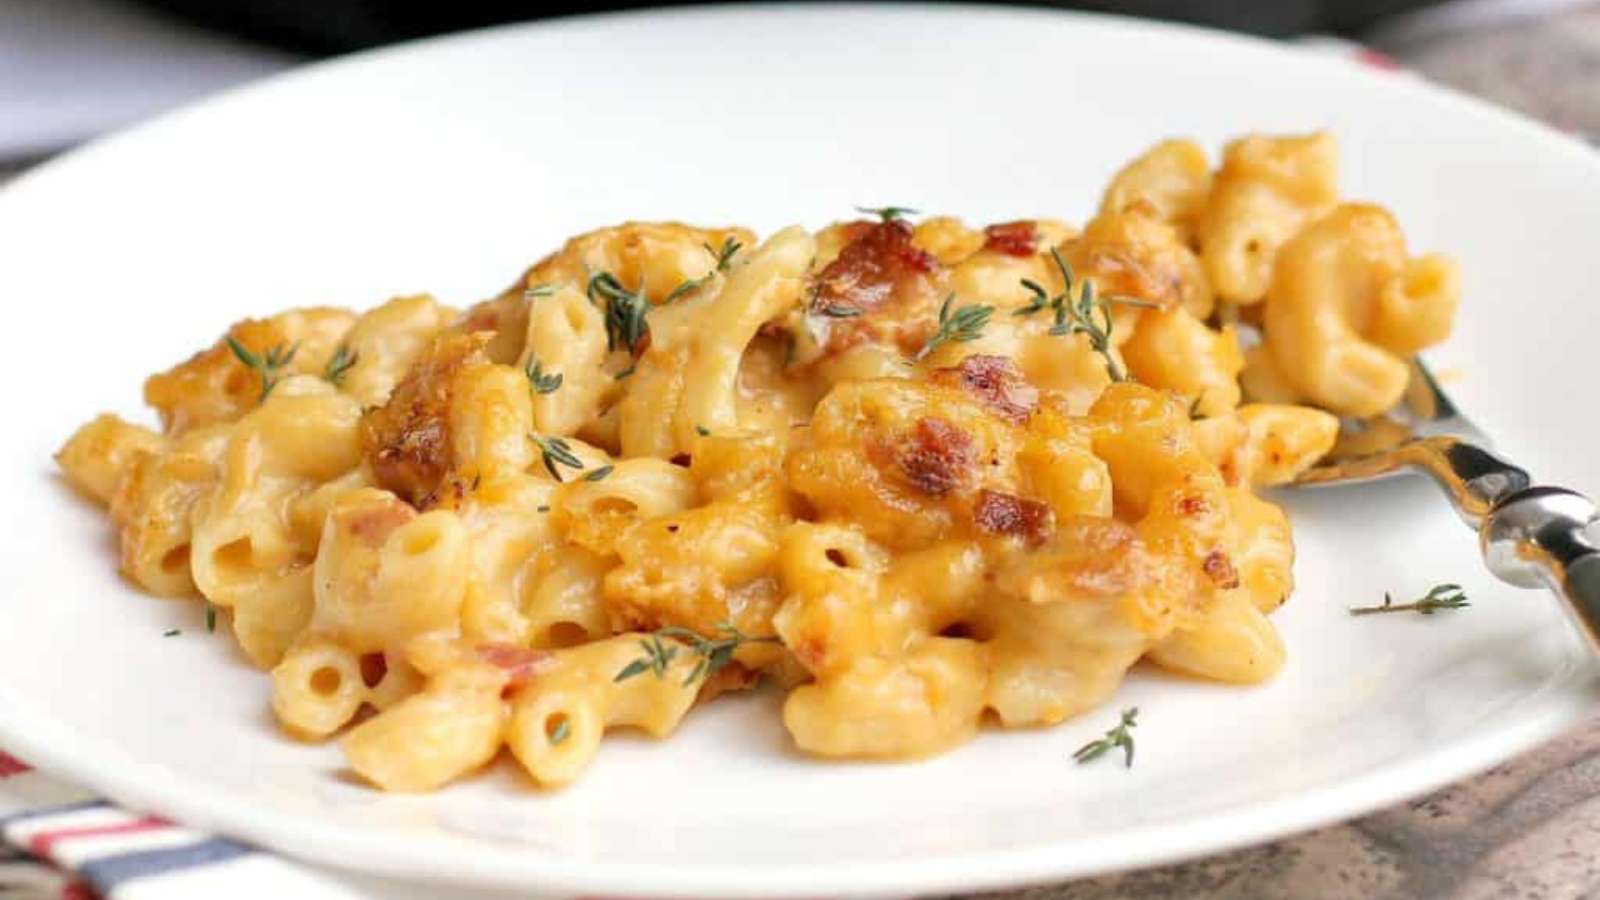 Macaroni and cheese with bacon and thyme, enhanced with the rich flavors of Guinness beer, served on a white plate.